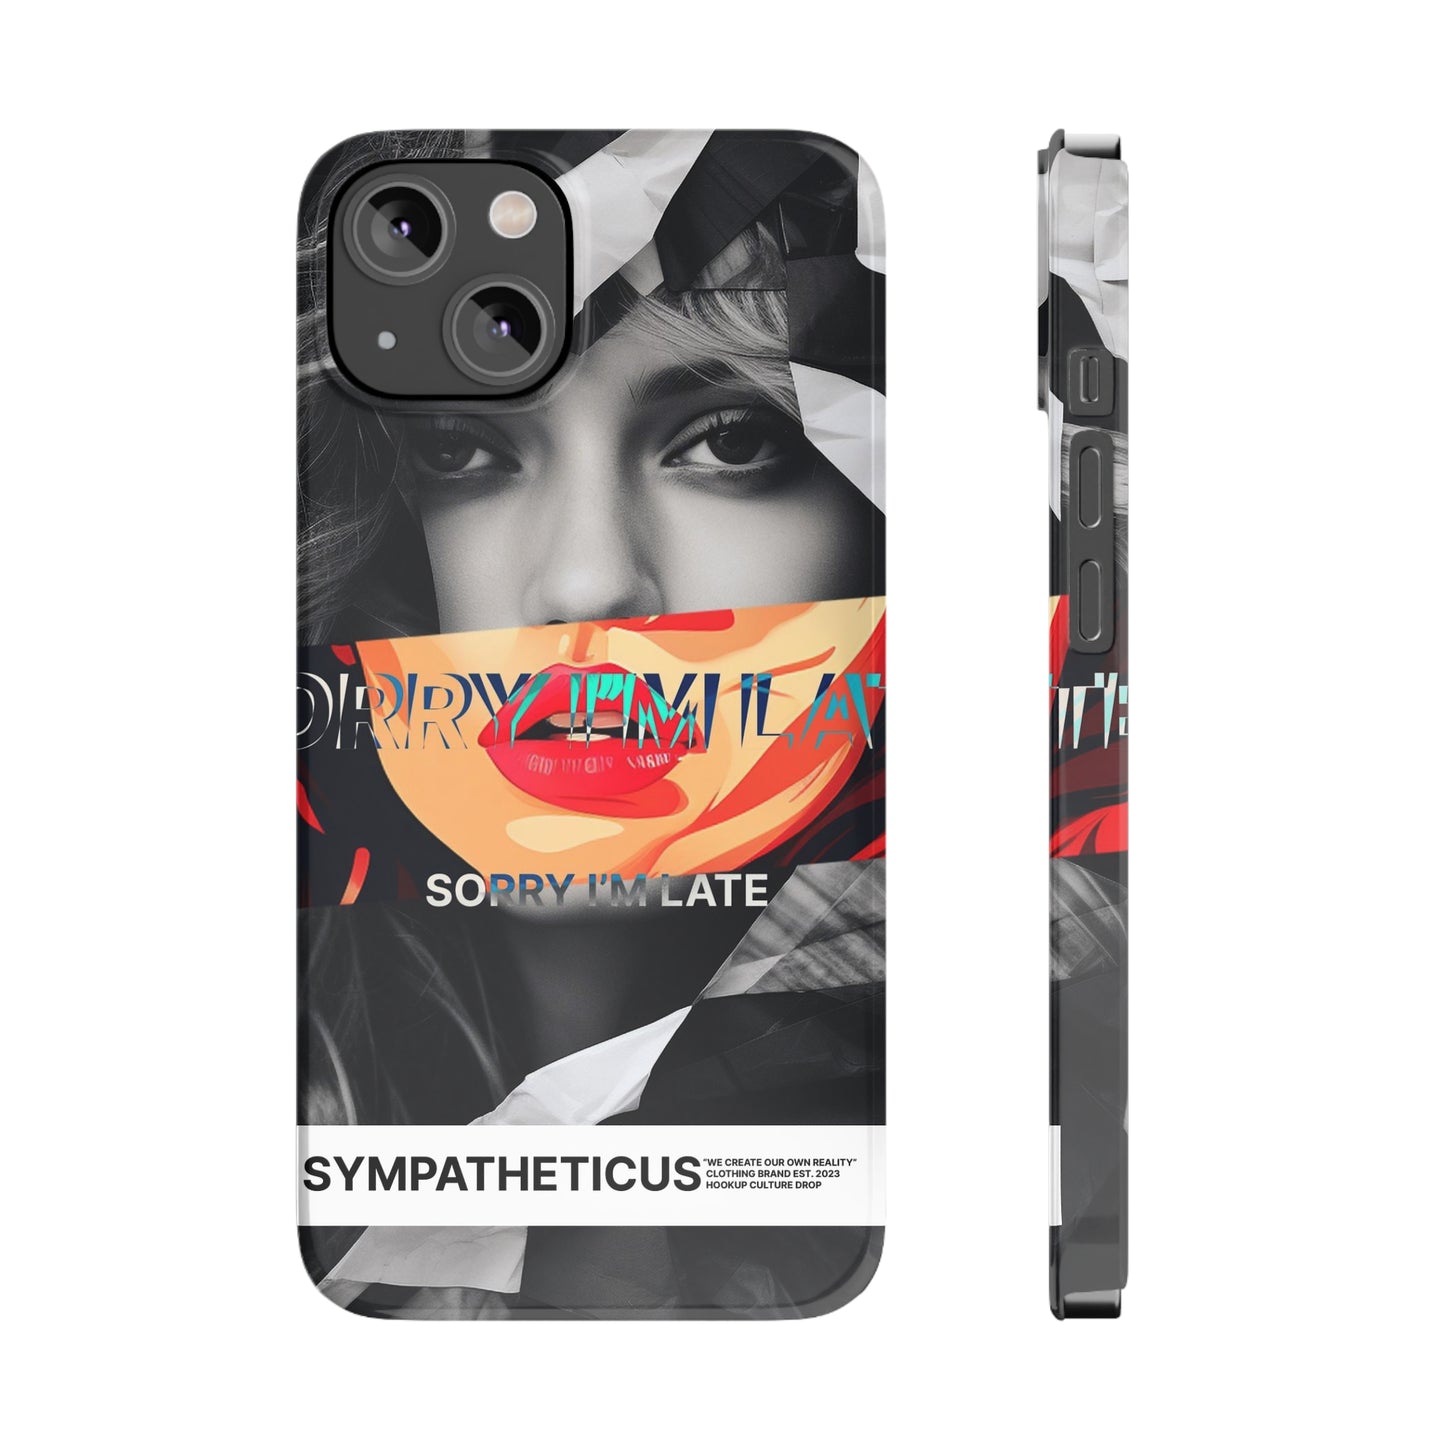 Hookup culture special iphone case-08